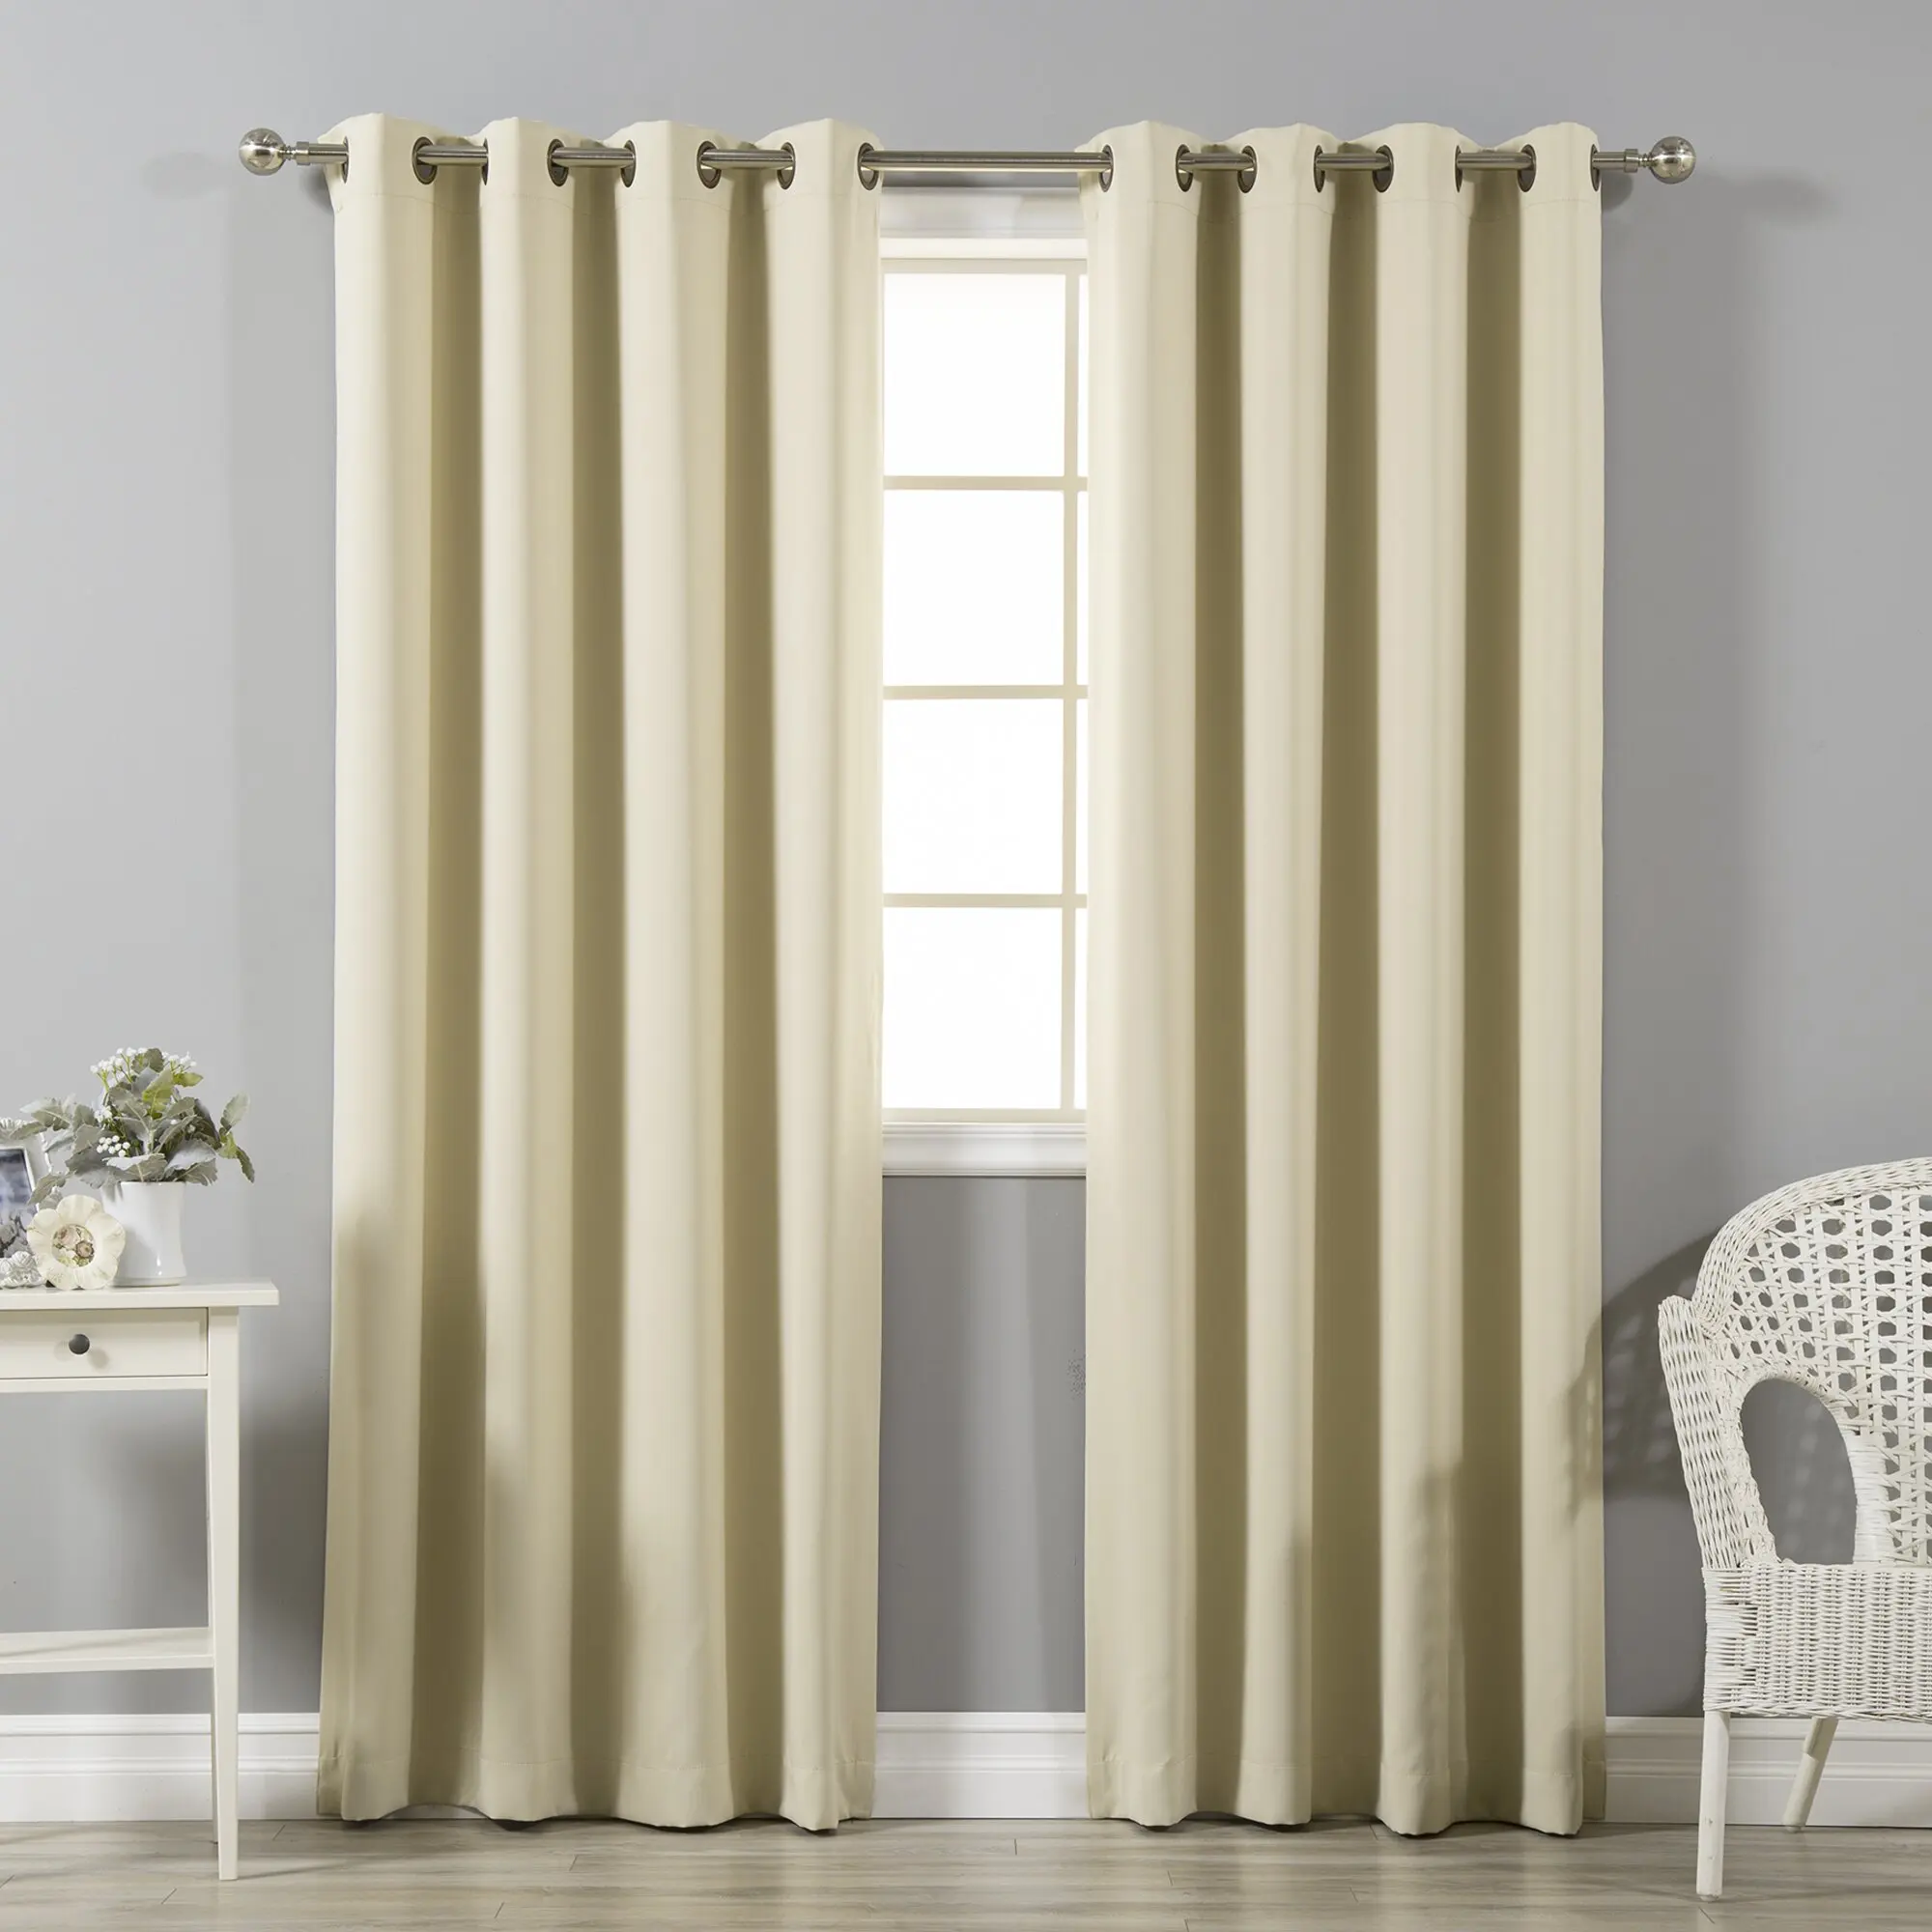 

Bedroom Blackout Curtains Panels, Thermal Insulated, Solid Grommet, Blackout Drapery, Living Room, Energy Saving, 215x215 cm